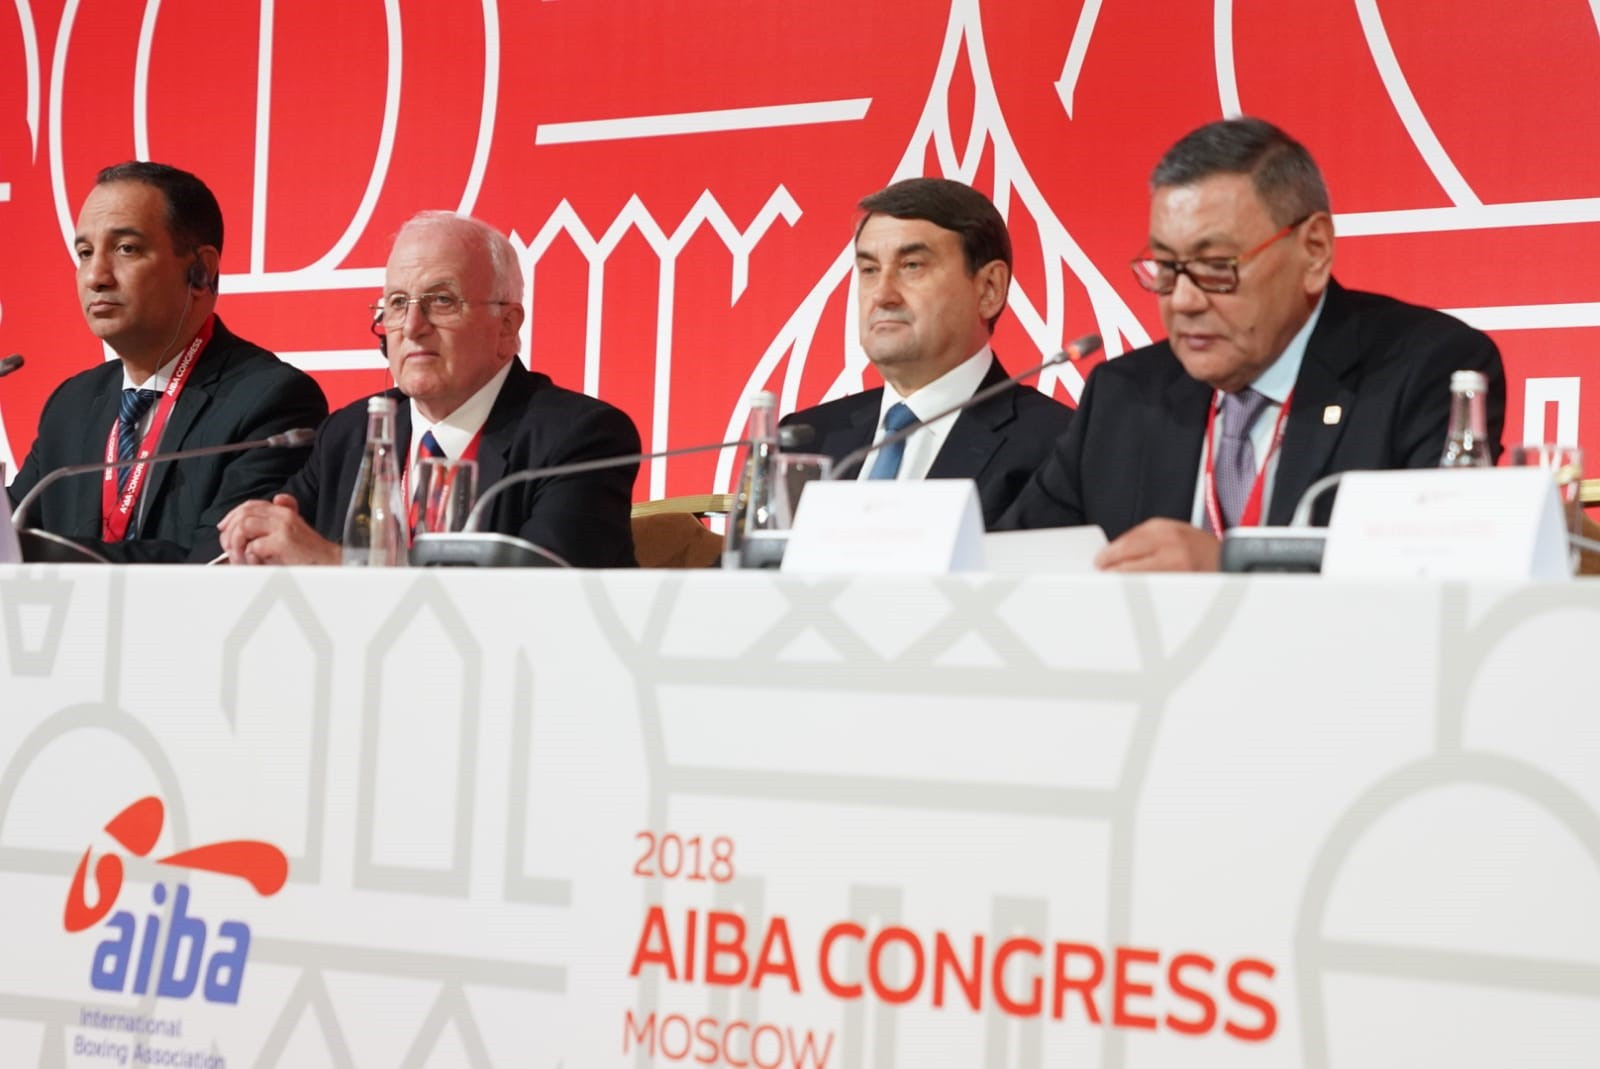 The AIBA Congress in Moscow will debate a proposal which would allow Gafur Rakhimov, far right, to step aside as President for up to year in the hope it will help save boxing's place on the Olympic programme at Tokyo 2020 ©AIBA